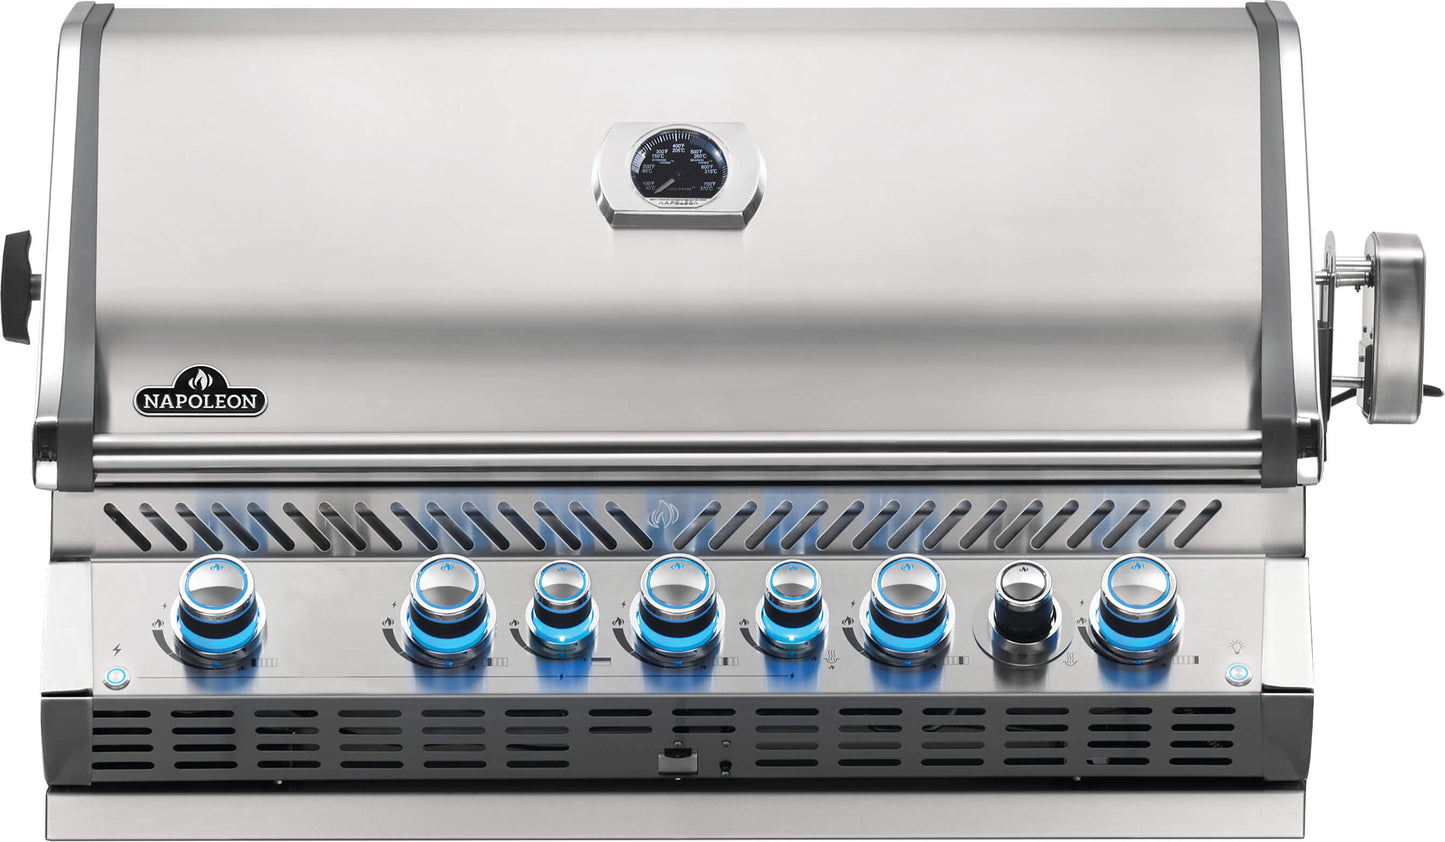 Built-in Prestige PRO™ 665 Grill Head with Infrared Rear Burner